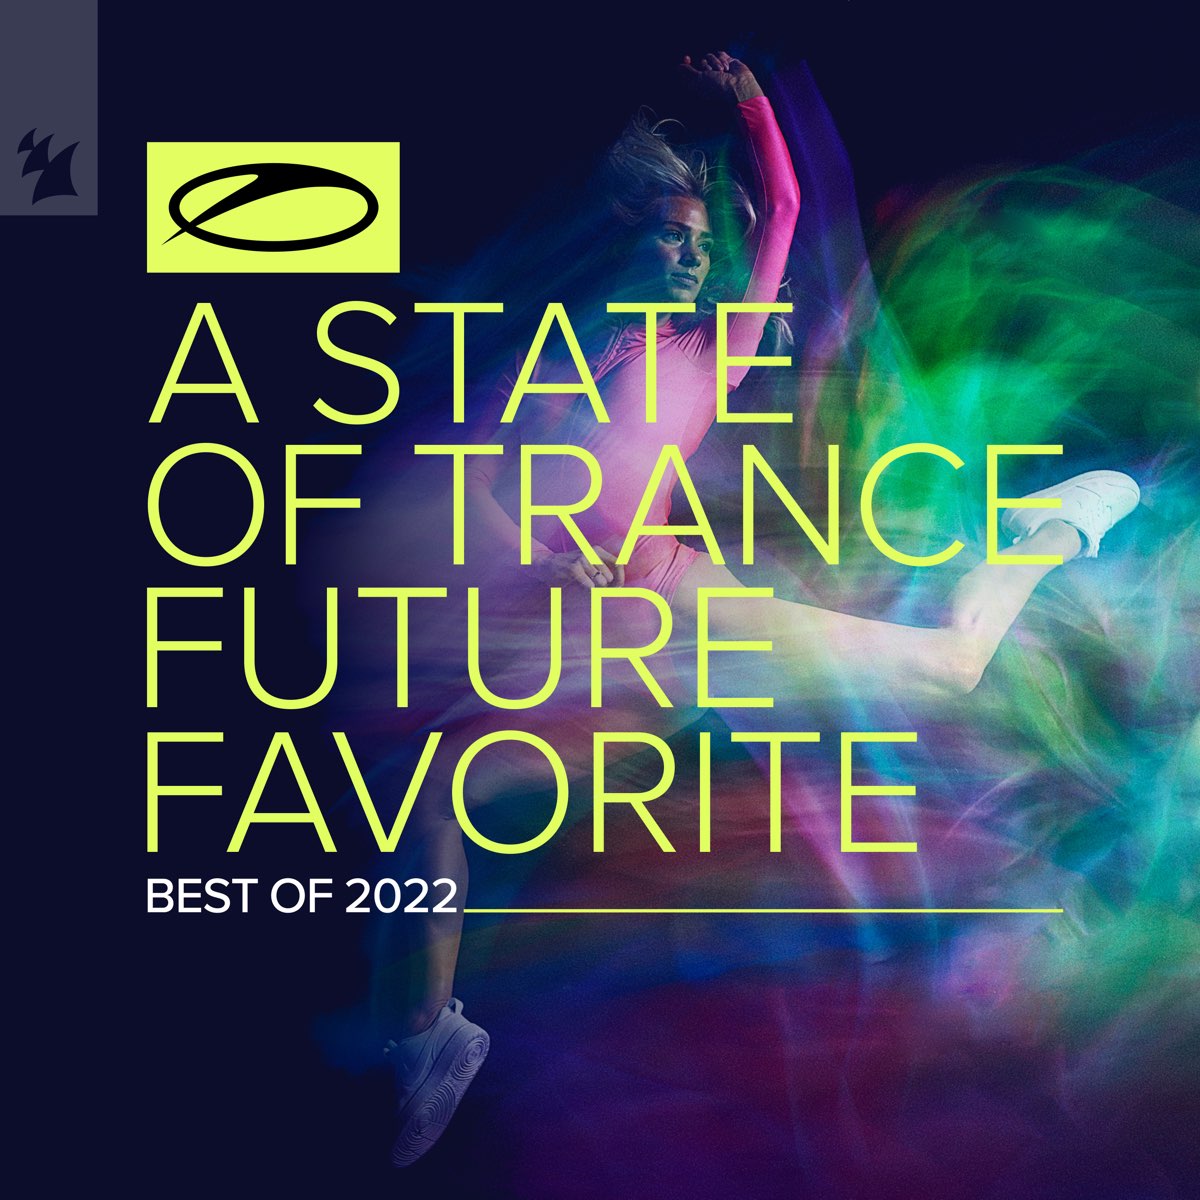 ‎A State of Trance Future Favorite Best Of 2022 by Armin van Buuren